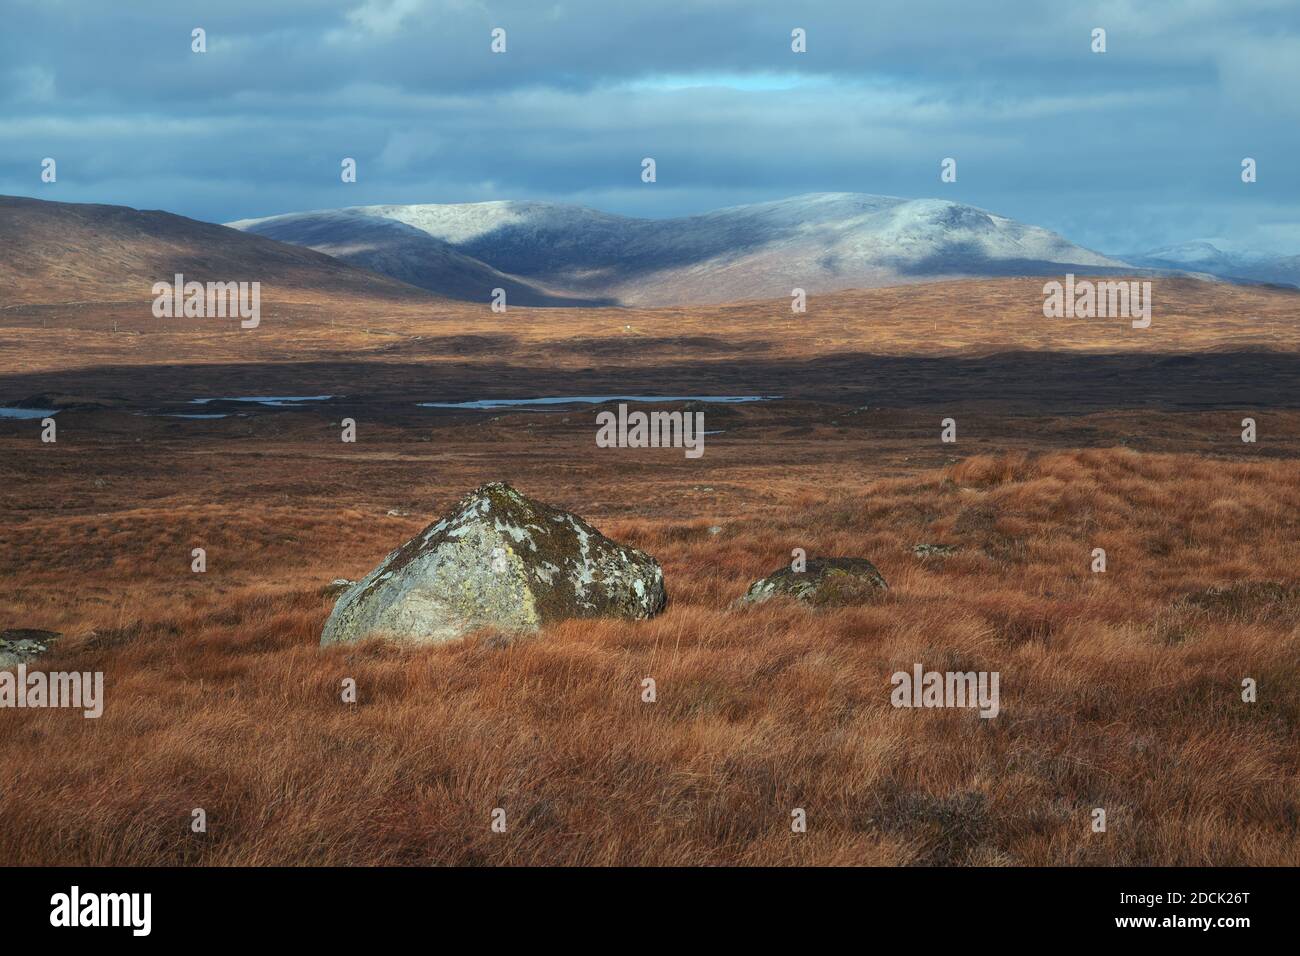 A large stone on a high-mountain plateau against a background of snowy mountain peaks. Scenic landscape autumn season view. View from the road to Glencoe. Highland, Scotland Stock Photo